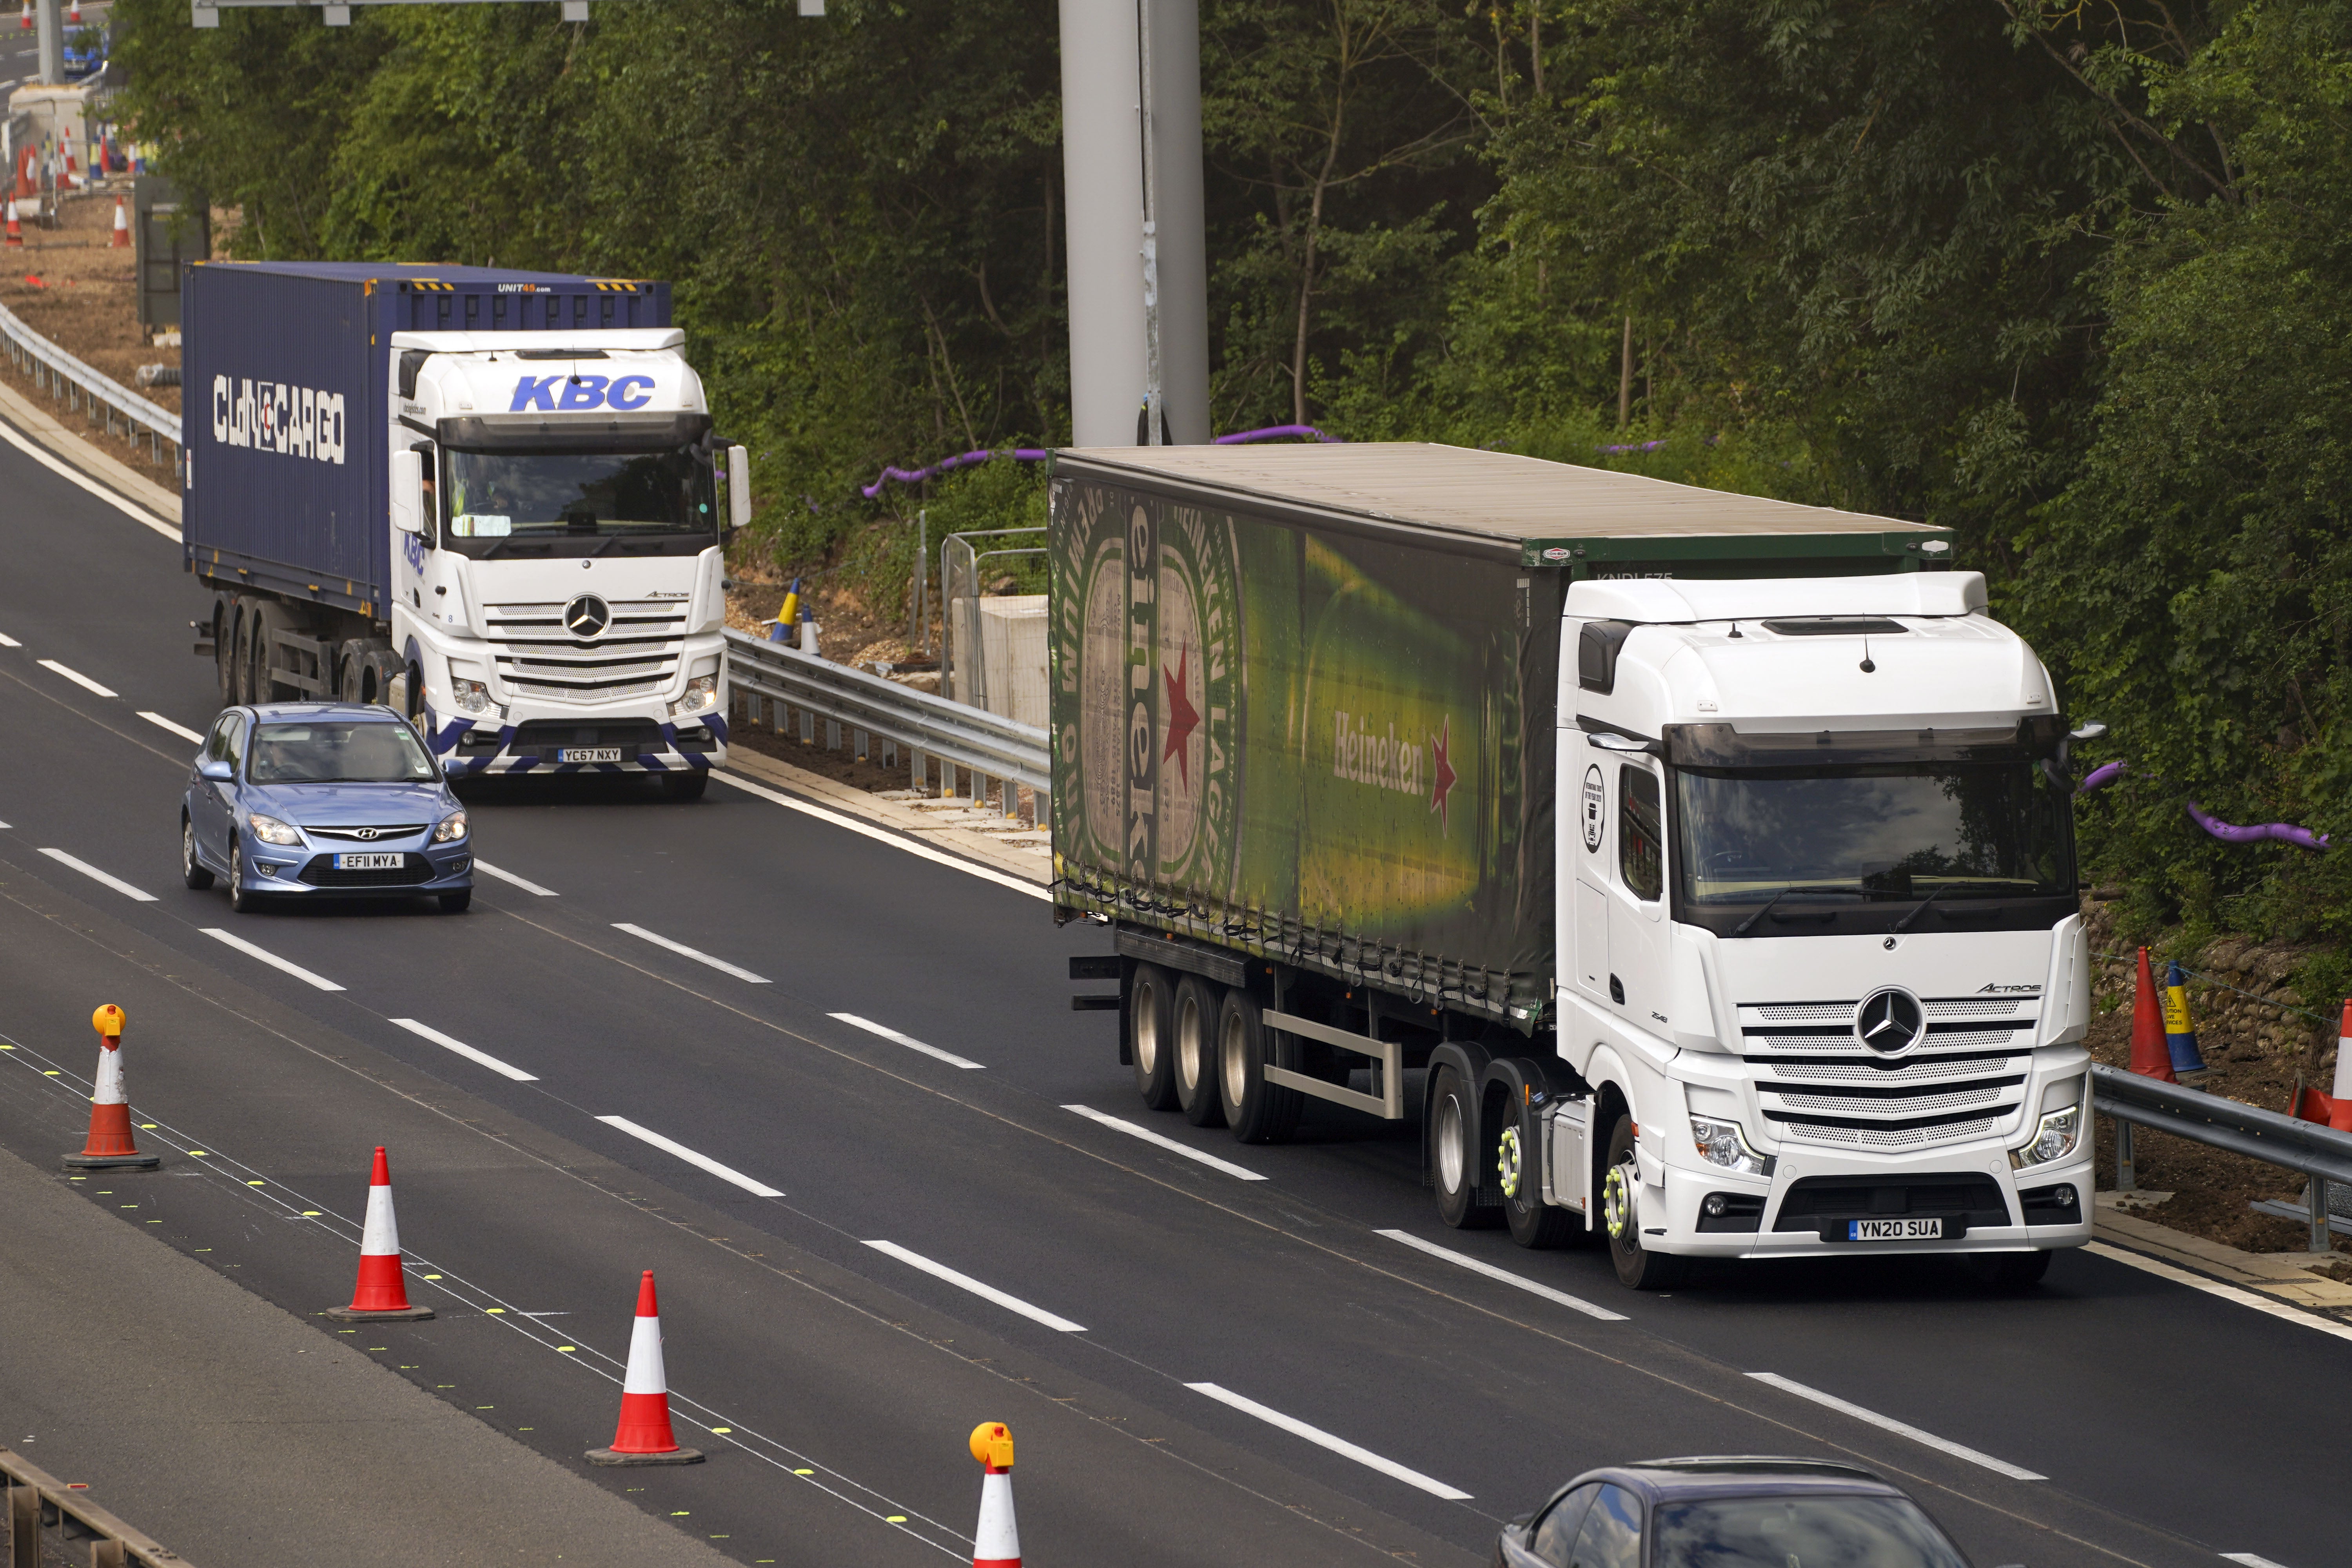 Around 100,000 lorry drivers are needed in the UK